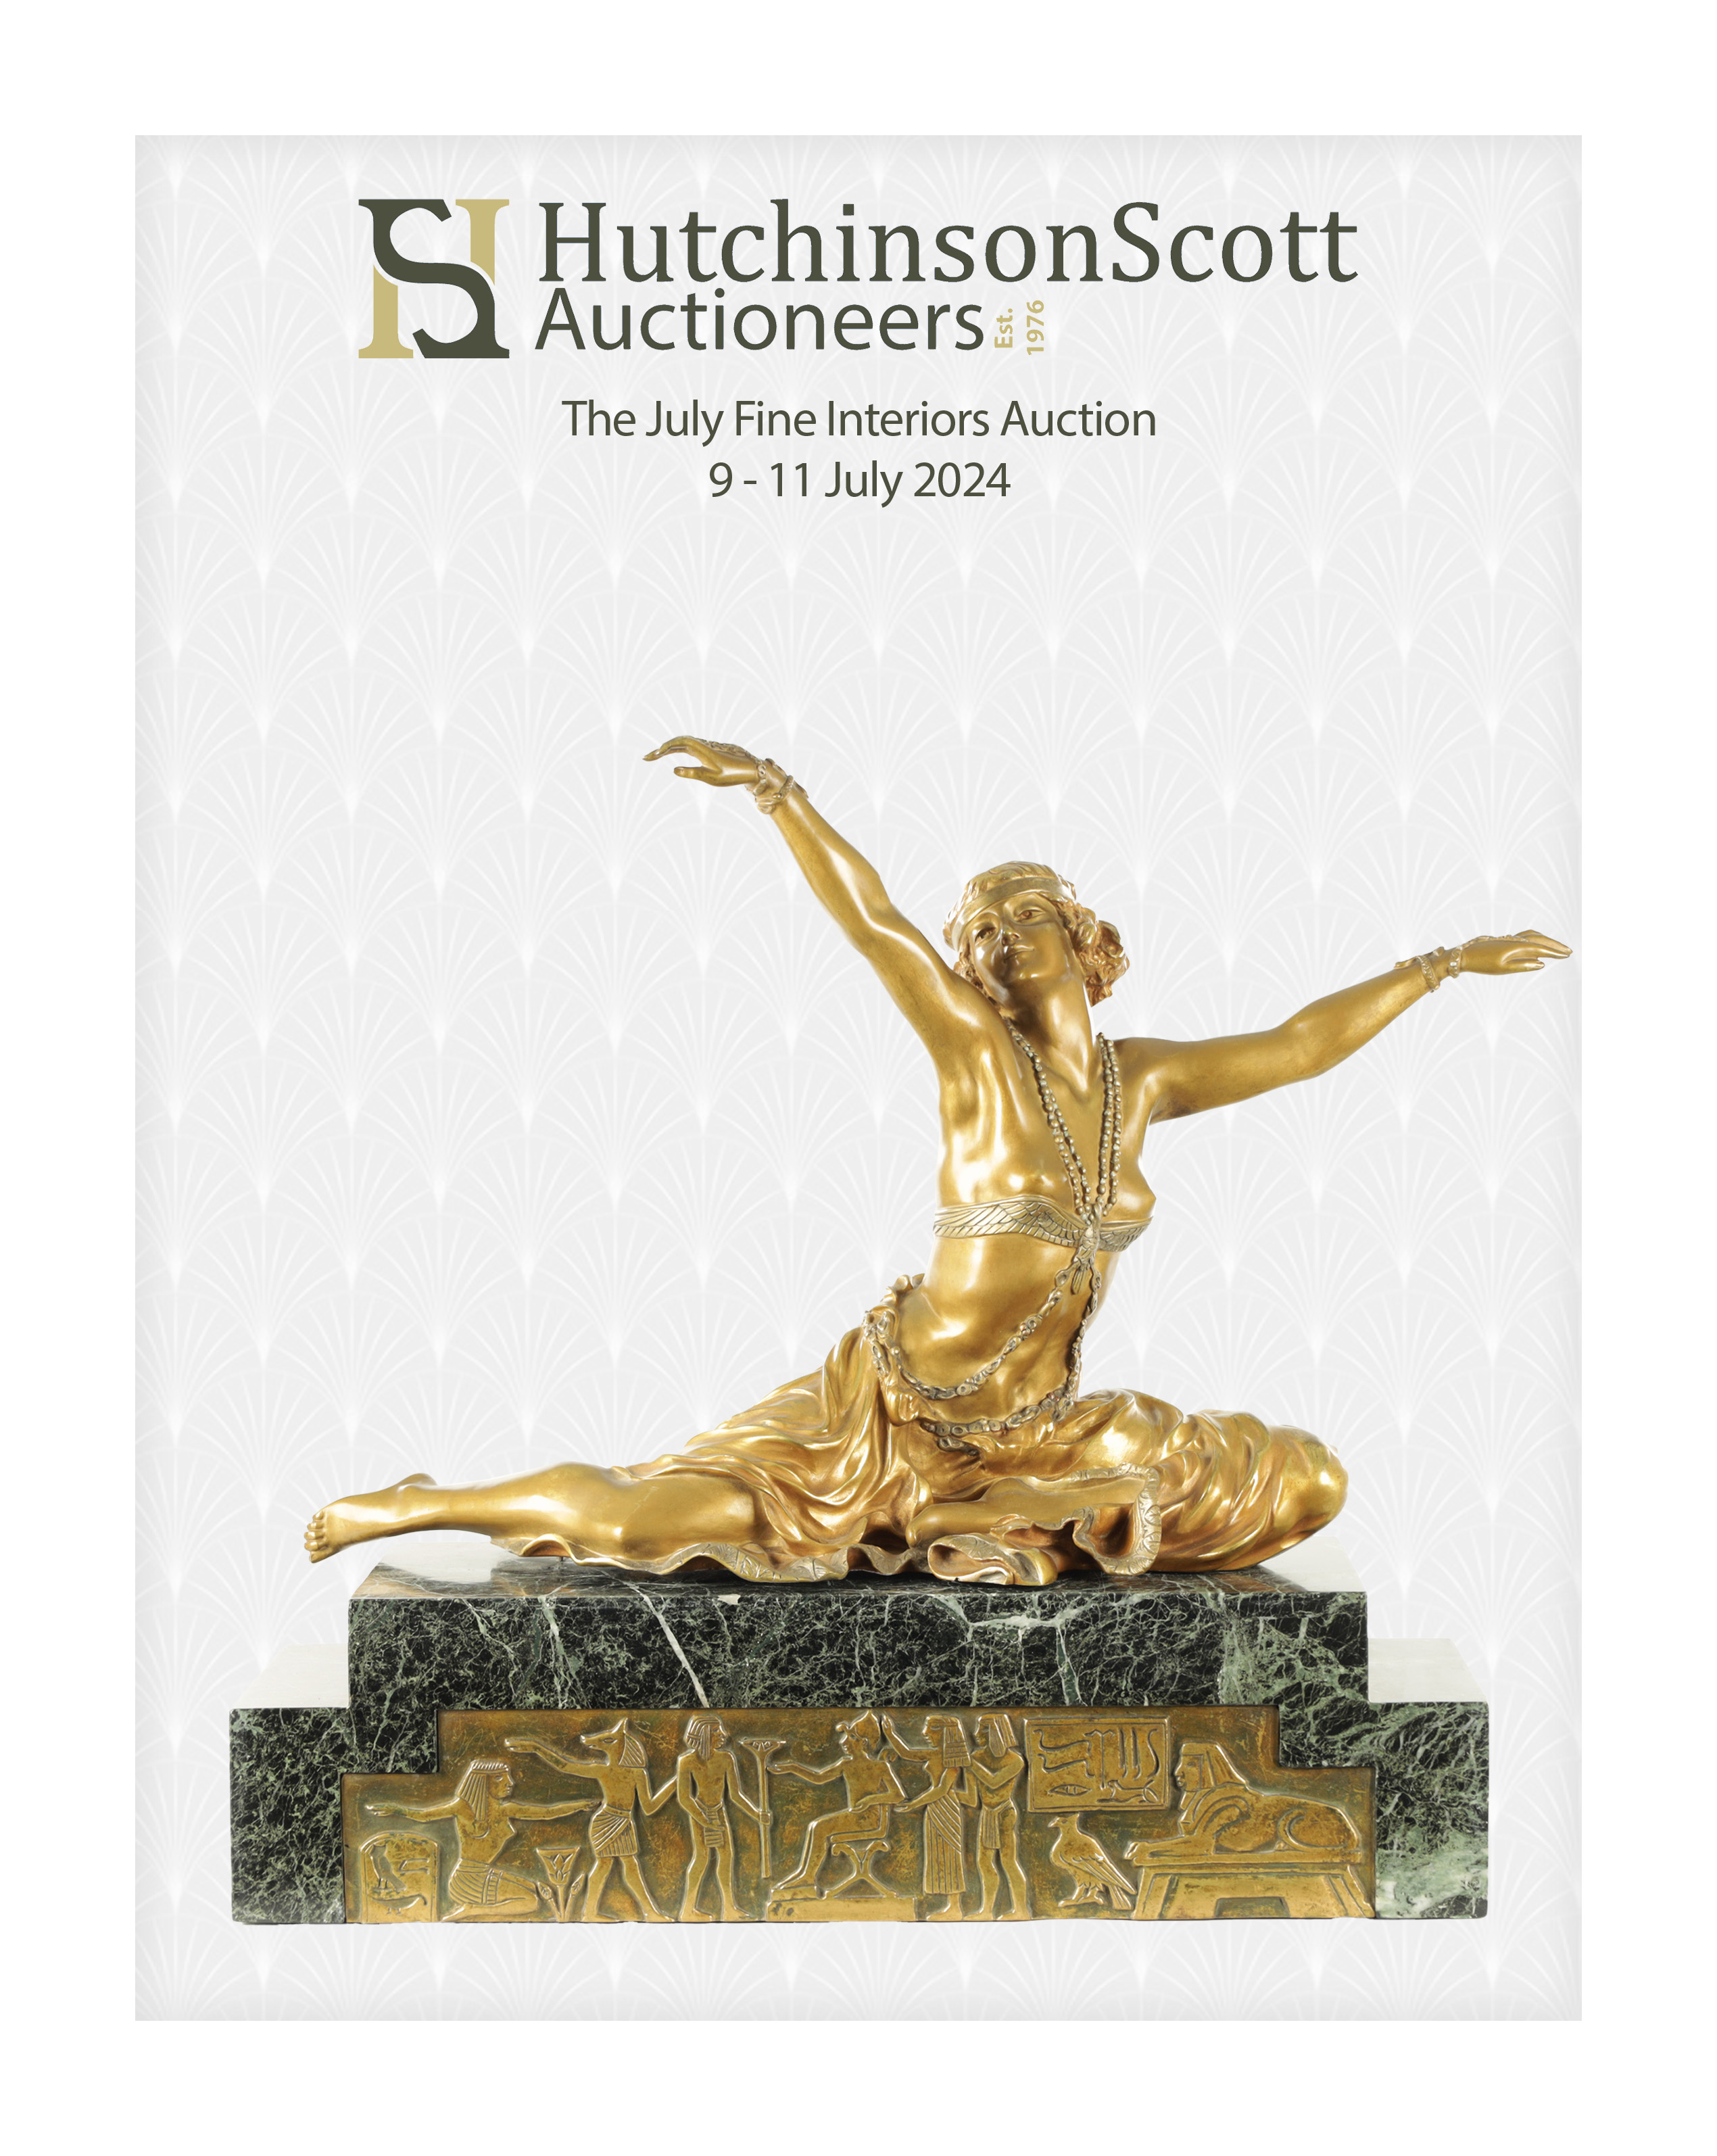 The July Fine Interiors Auction